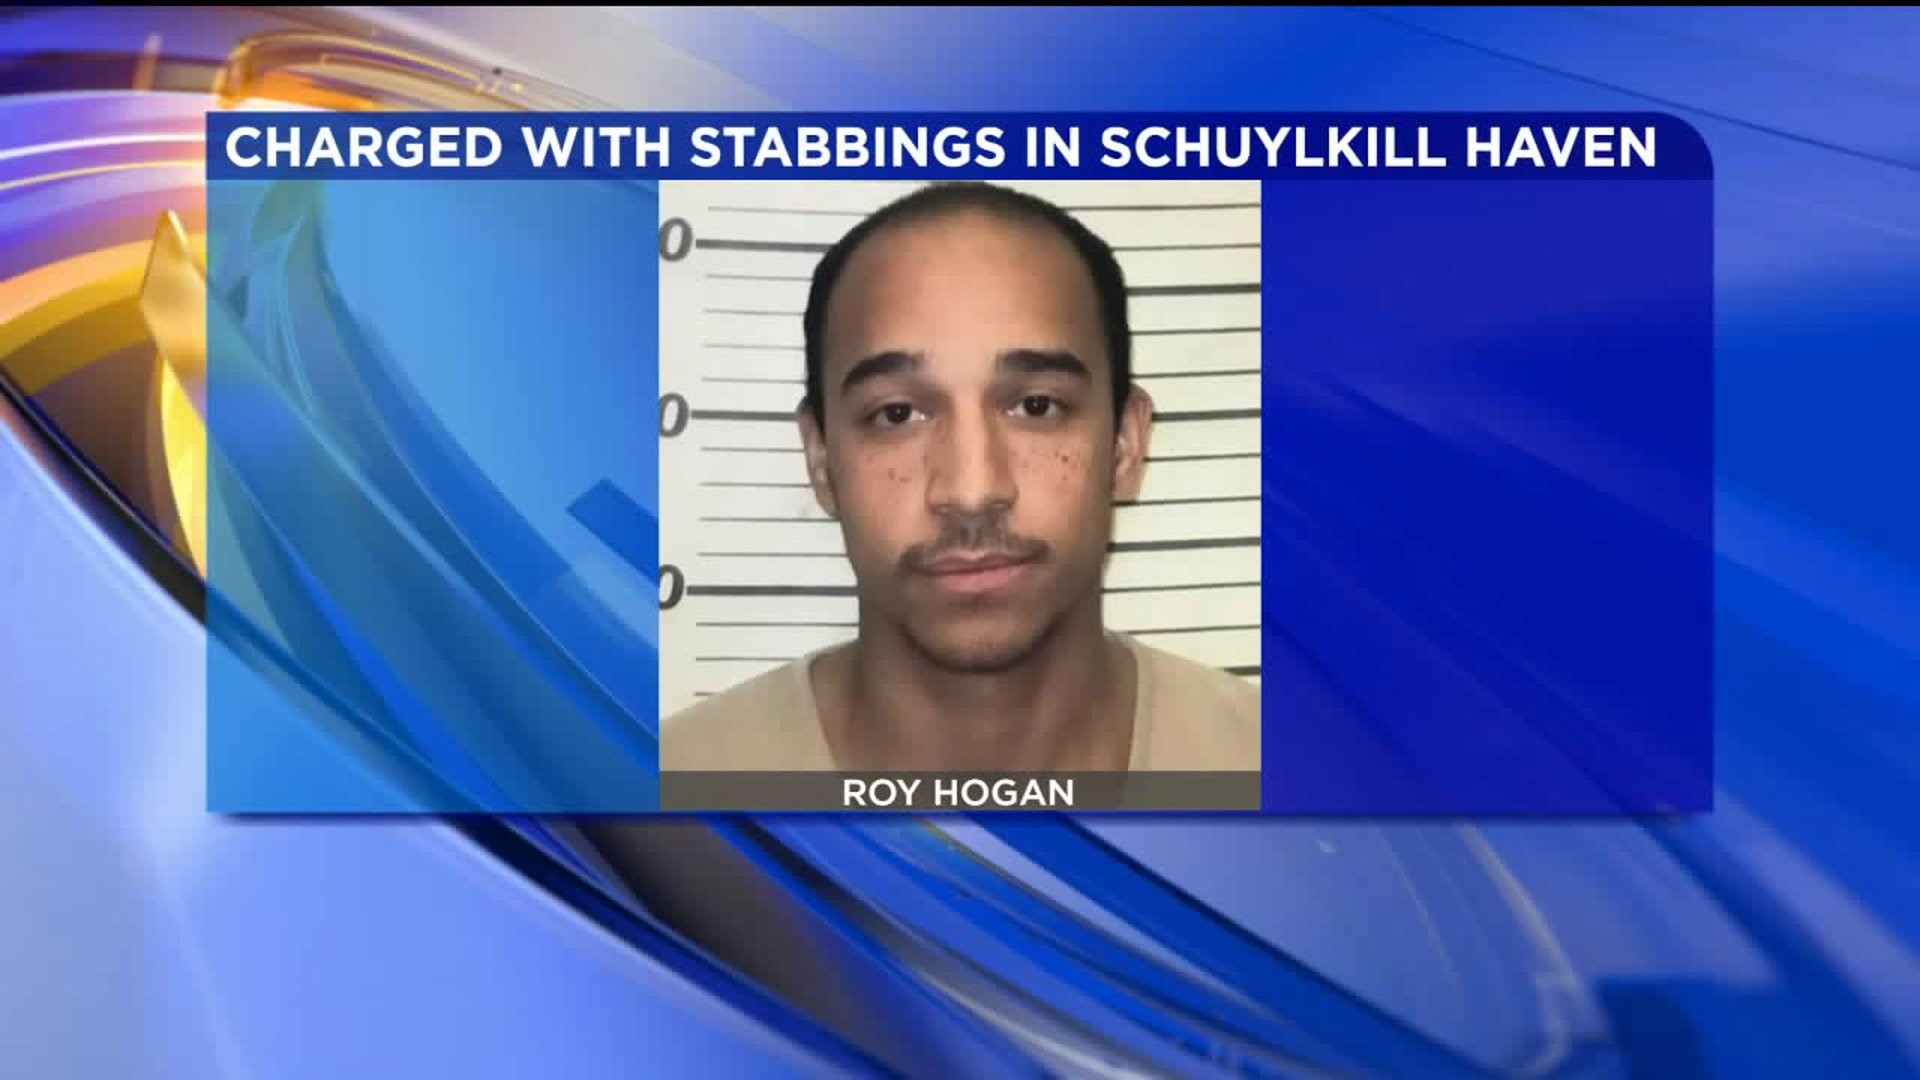 Man Charged for Stabbing Three People in Schuylkill Haven